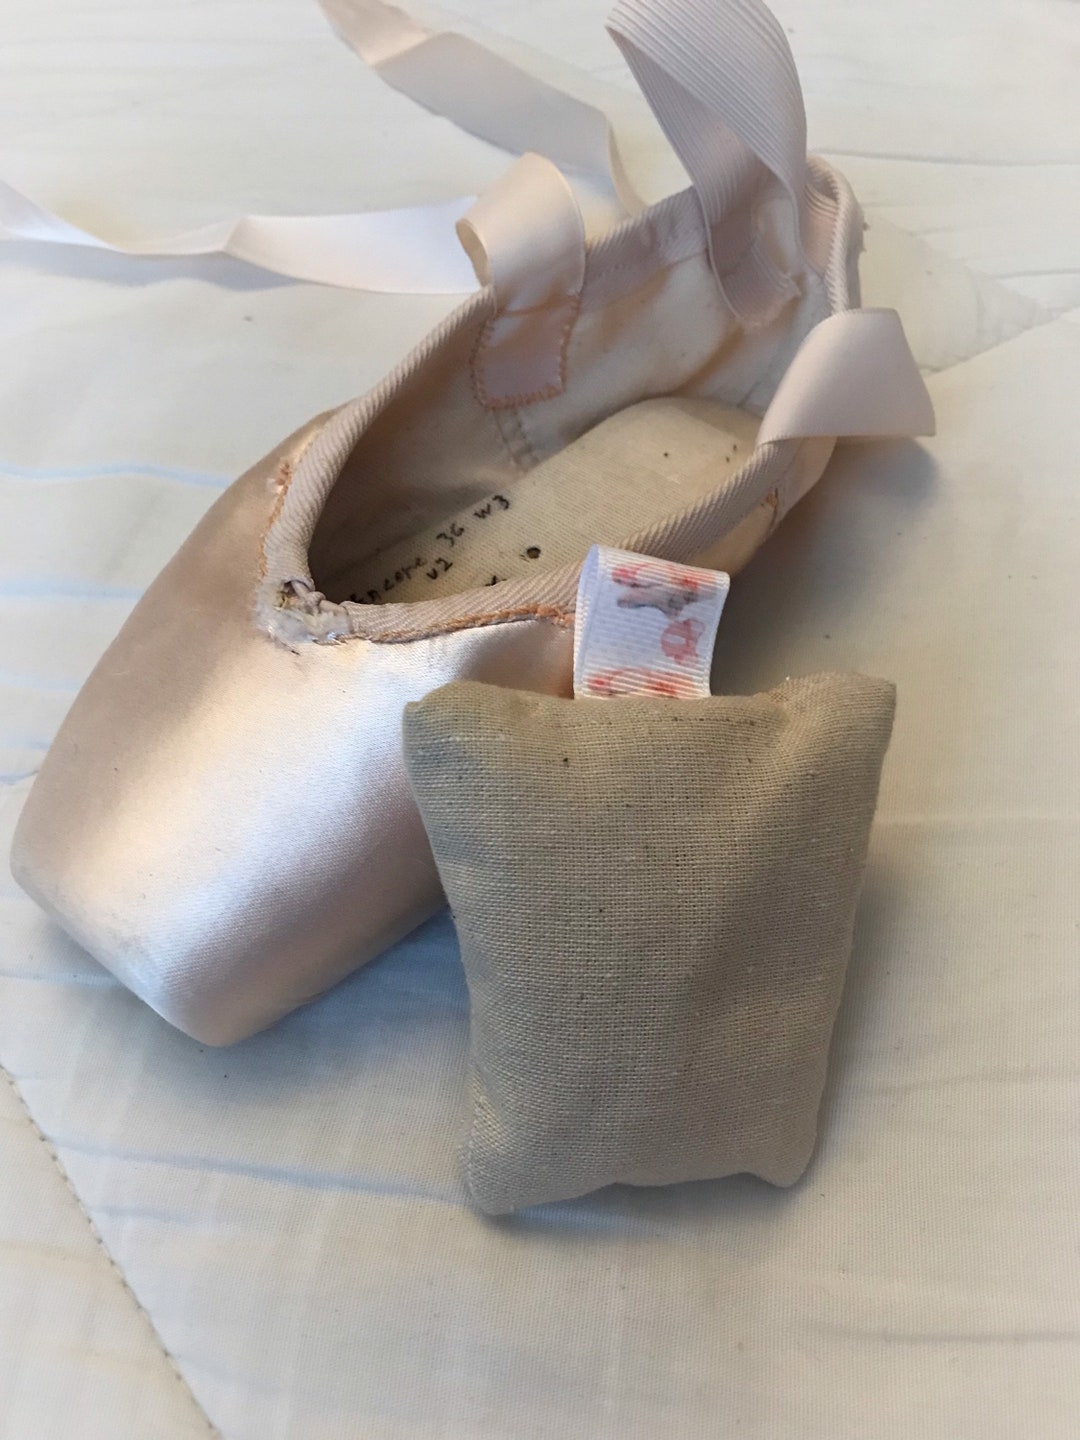 Pointe Shoe/toe Shoe Ballet Ribbons and Elastics Pink Sold by the Roll 